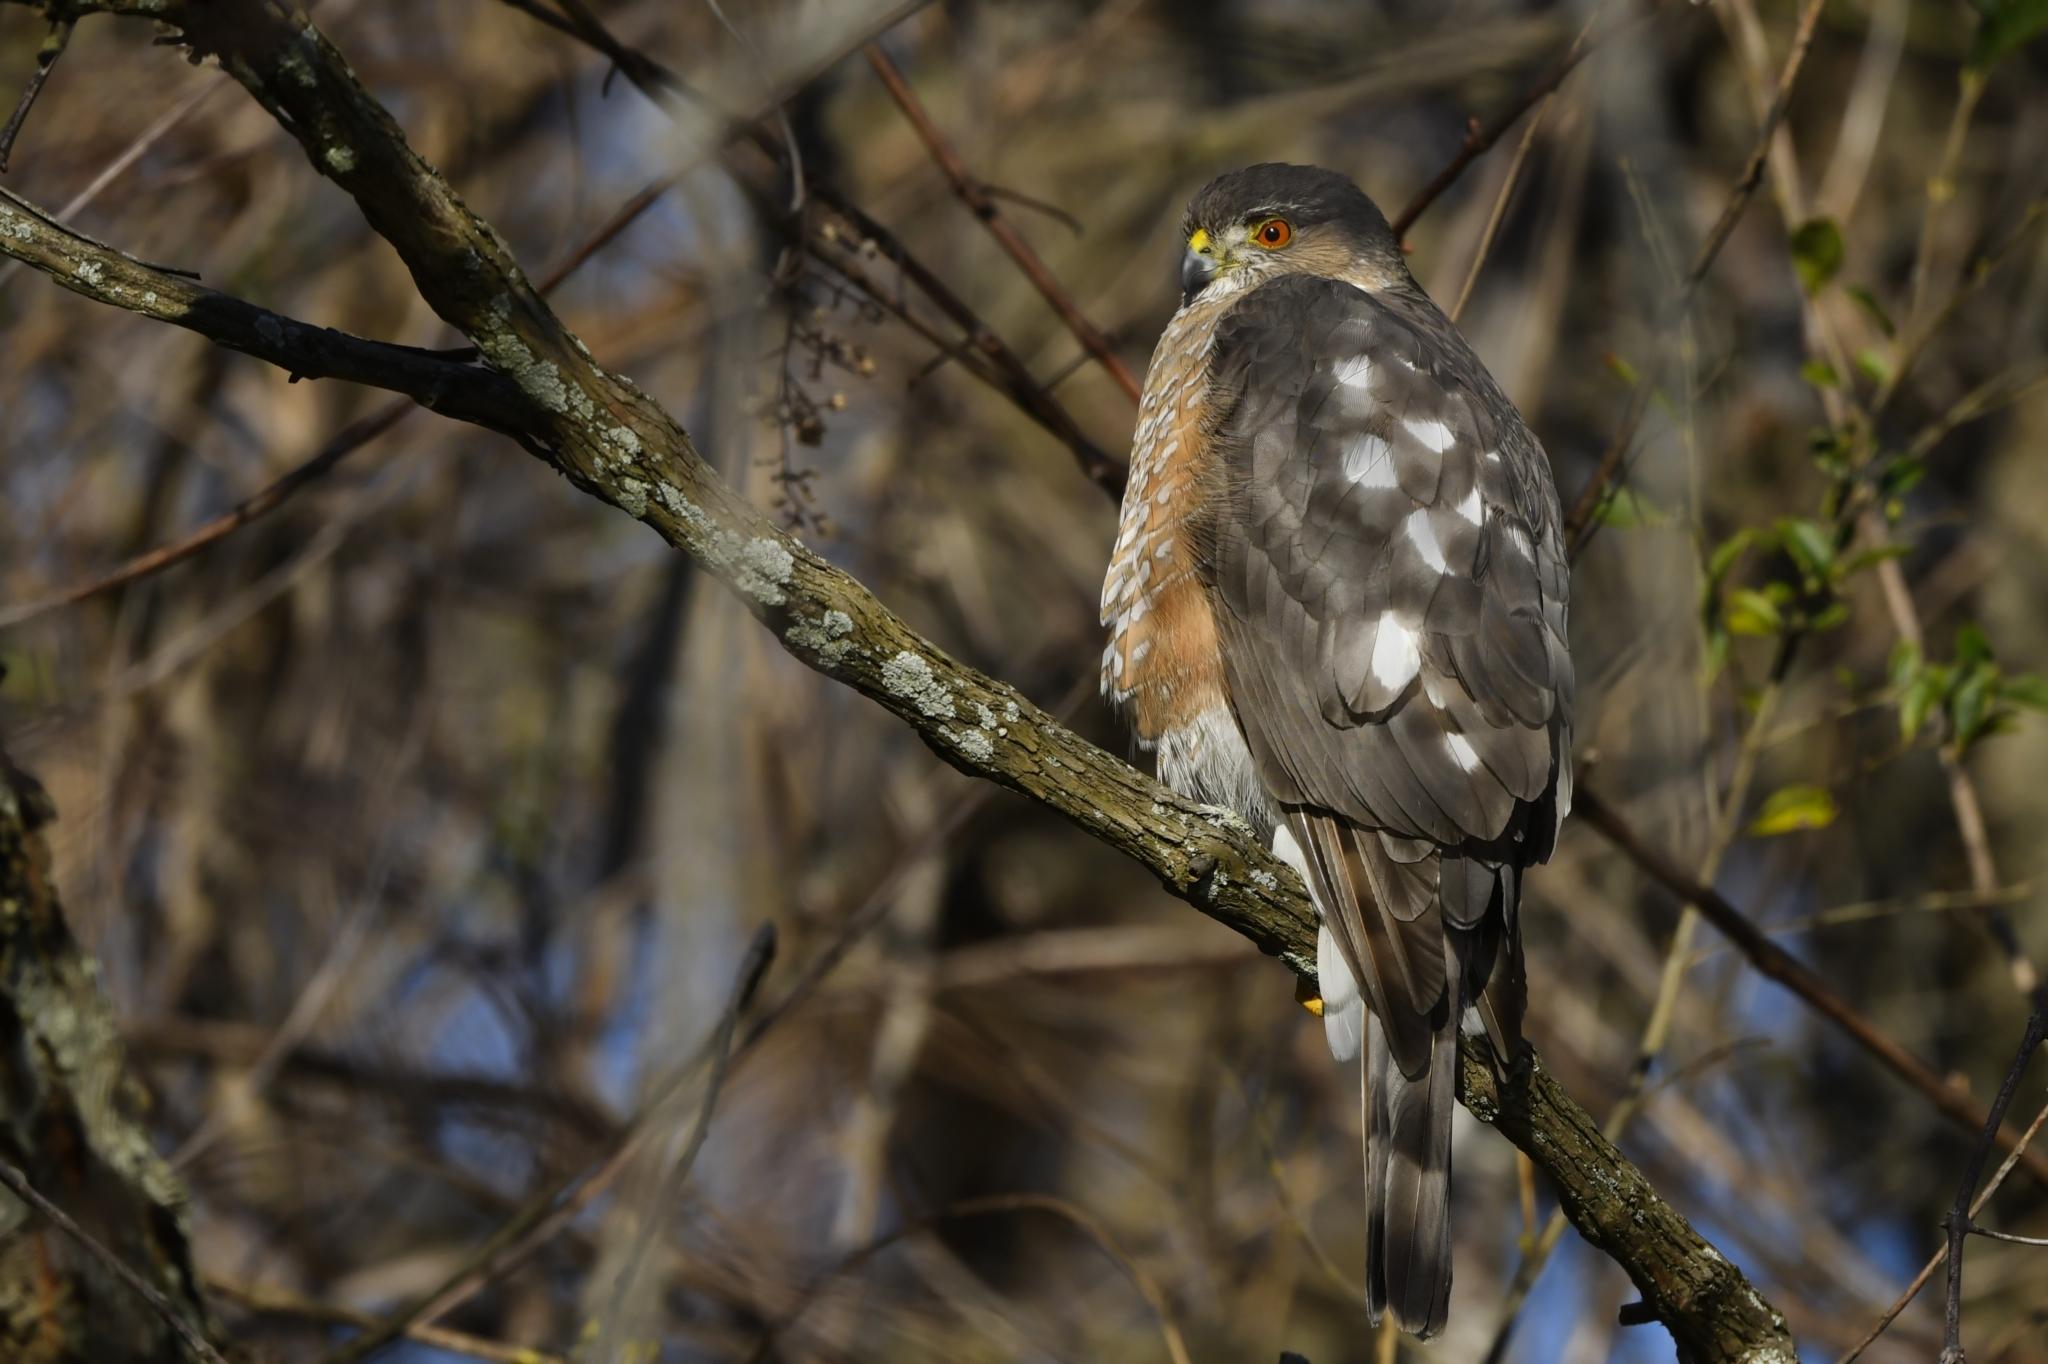 Sharp-shinned hawk perched on a branch